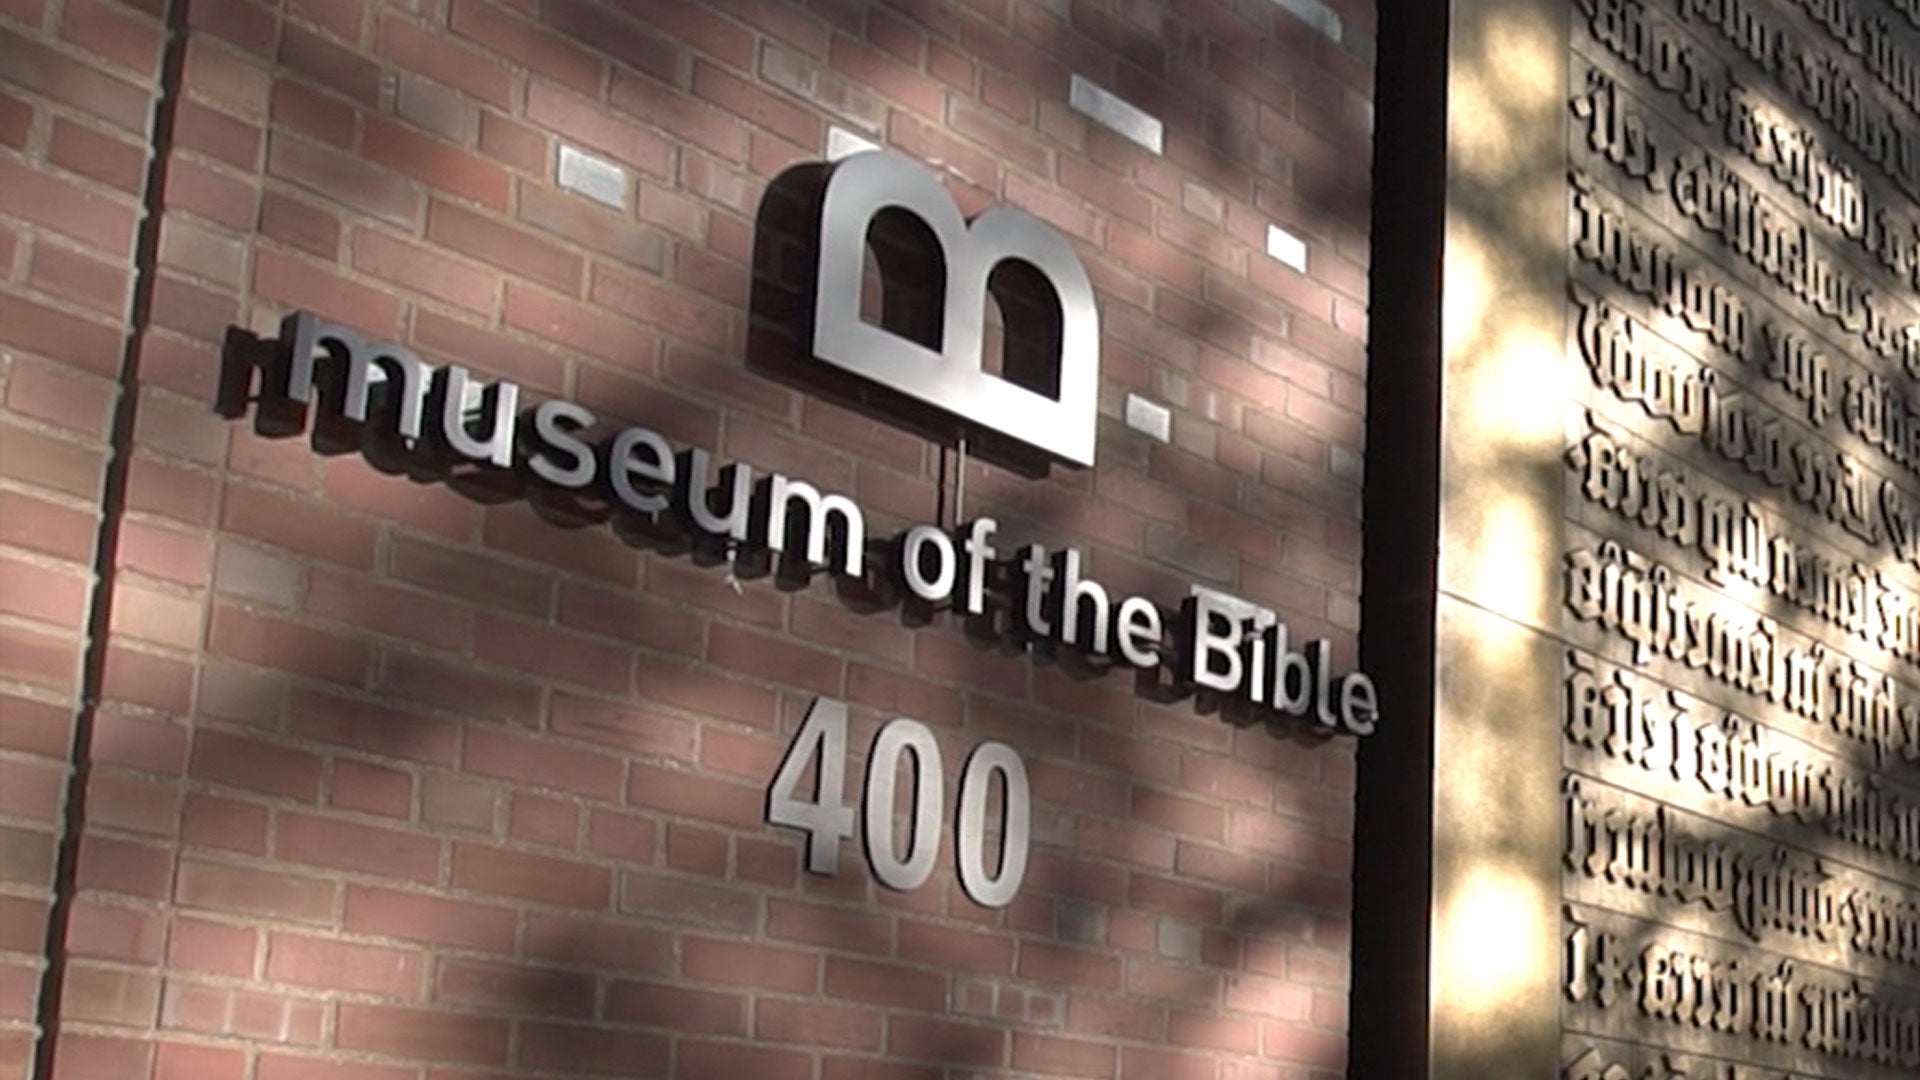 Museum of the Bible Gets a New Leader: ‘Lift Up the Word of God’